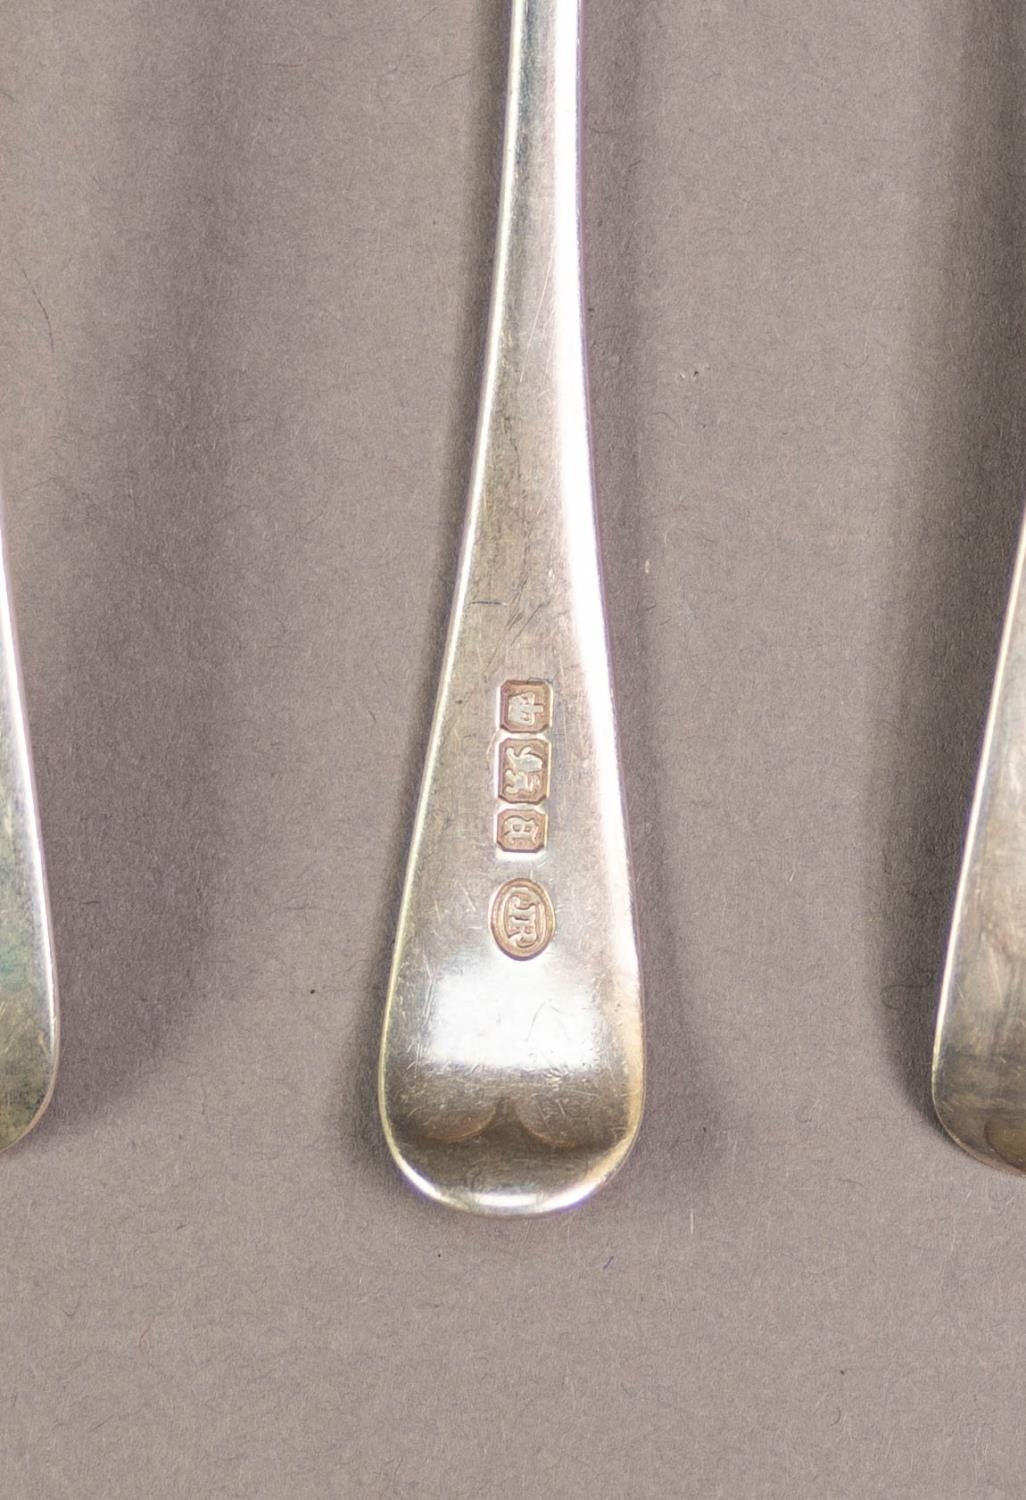 LATE VICTORIAN SET OF TWELVE EARLY ENGLISH PATTERN SILVER TEASPOONS BY JOHN ROUND & SON Ltd, - Image 2 of 2